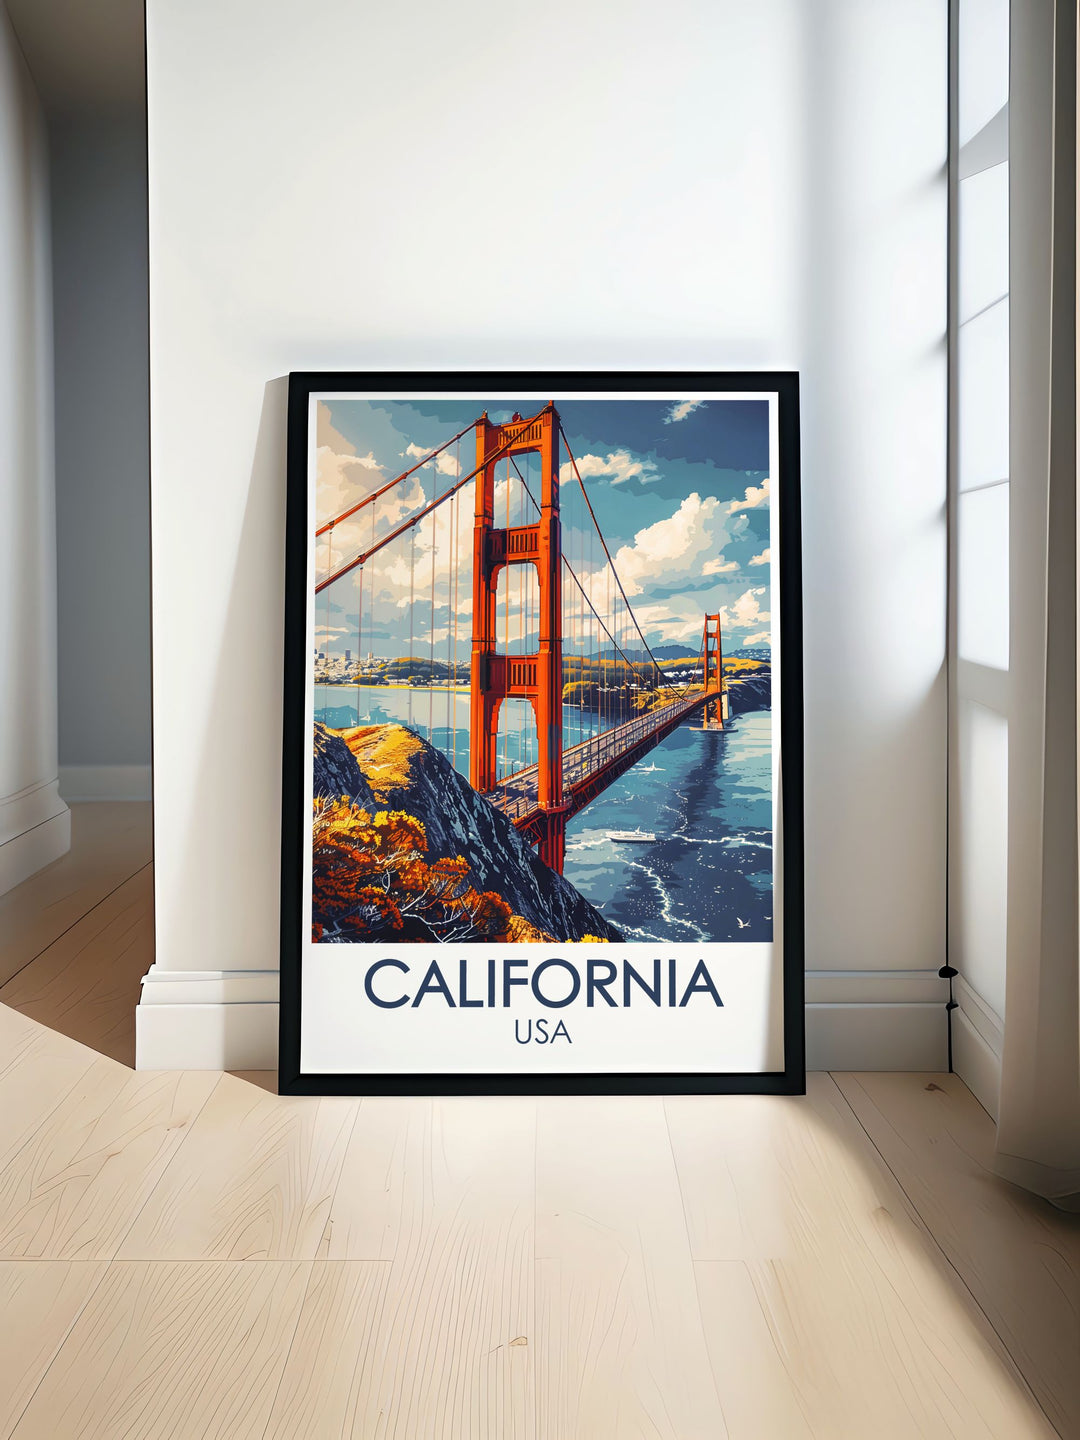 This travel poster beautifully depicts the magic of the Golden Gate Bridge, with its iconic design and stunning views, making it an ideal piece for architecture enthusiasts and collectors. Bring the beauty of San Francisco into your home with this exquisite print.